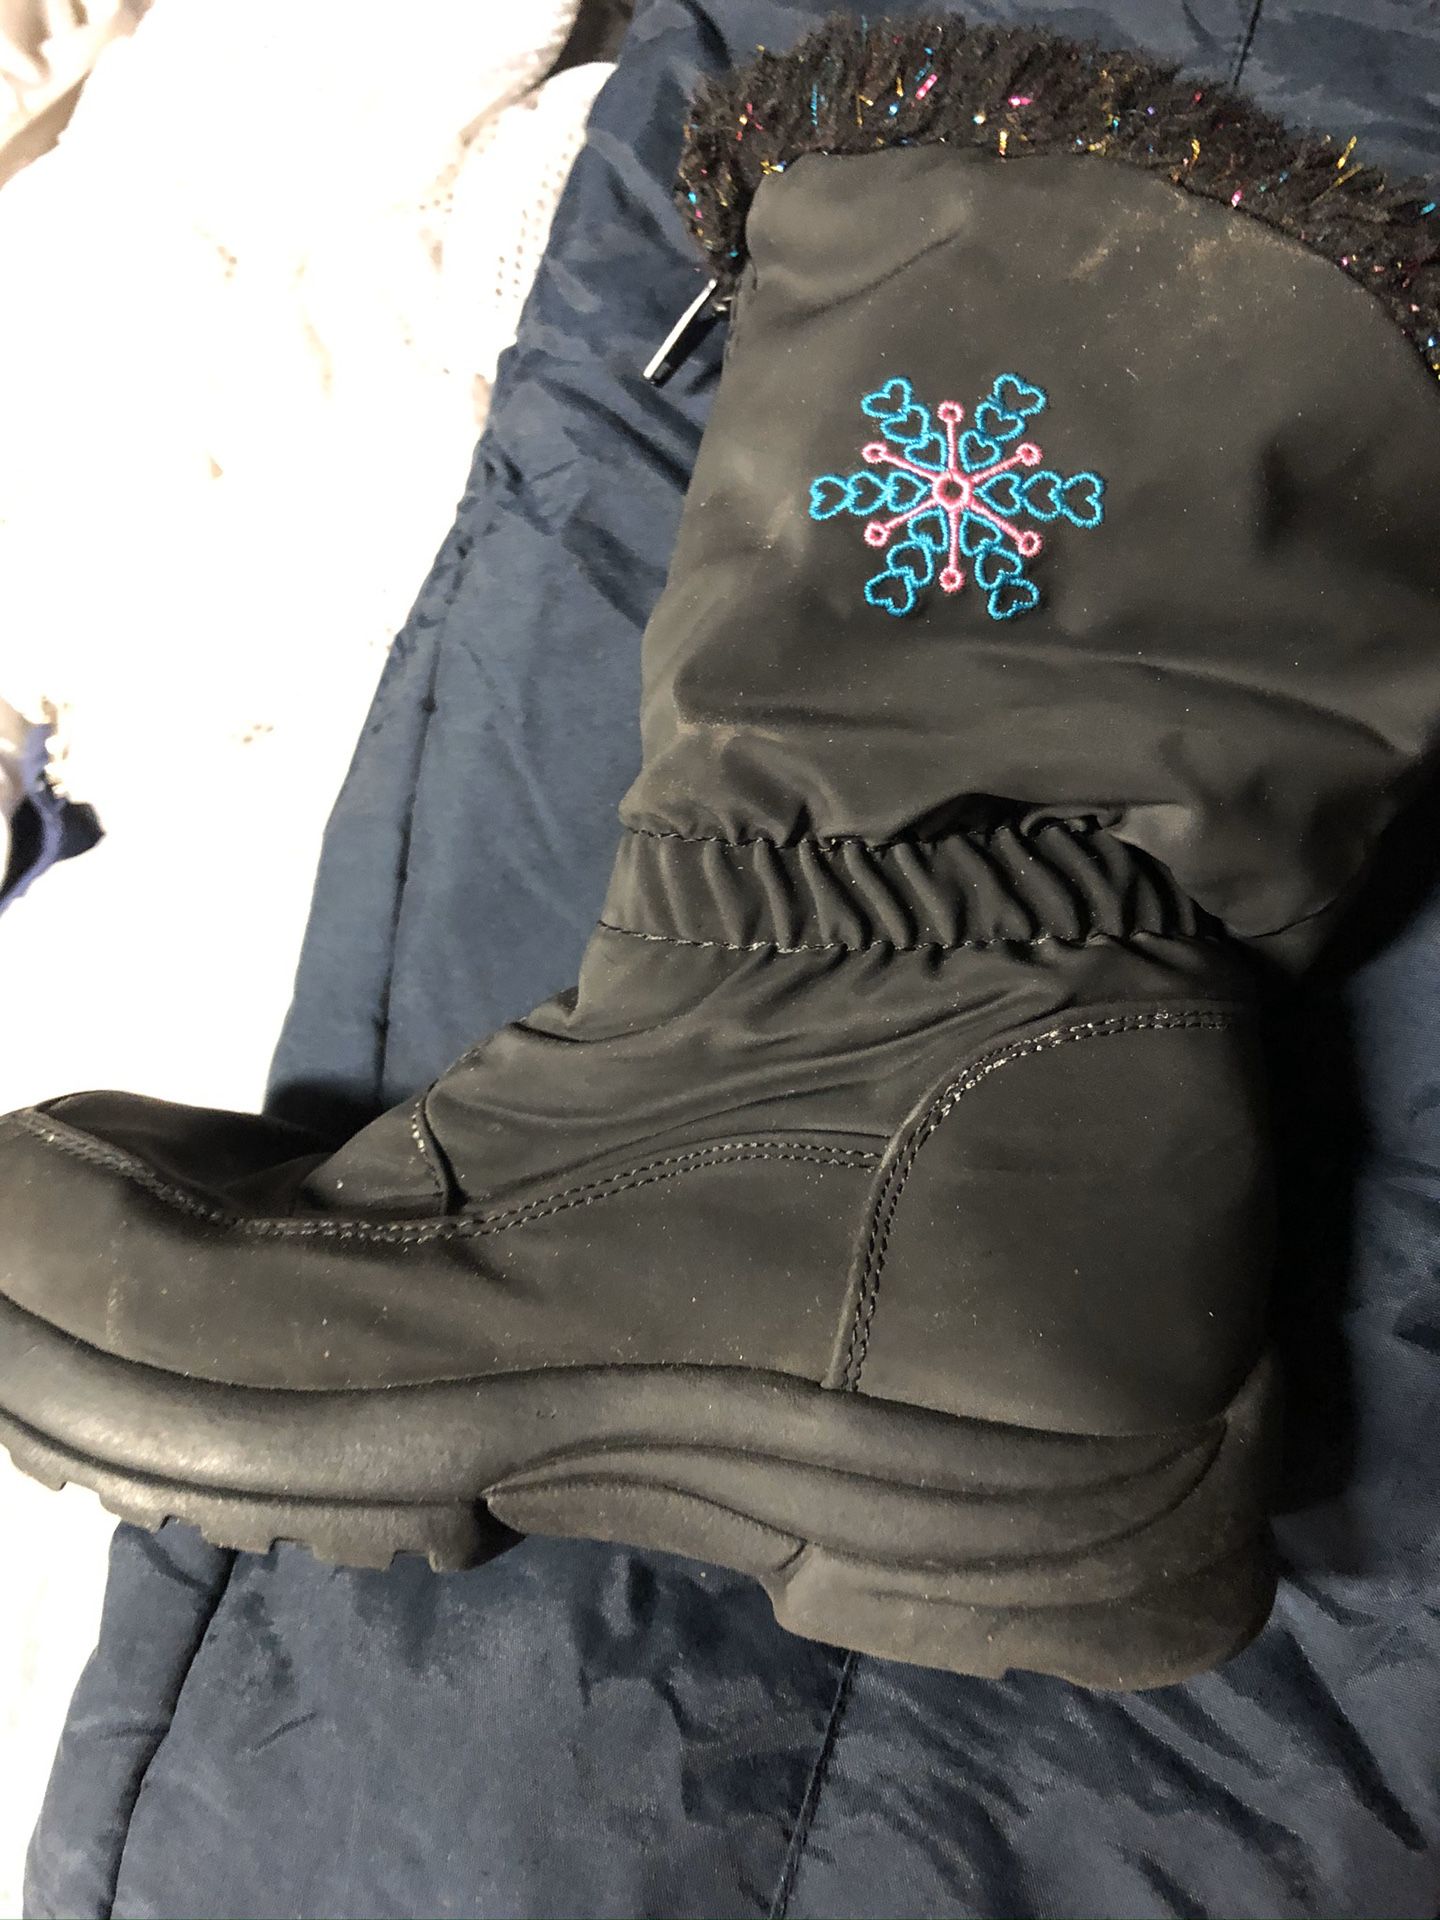 Size 12 snow boots